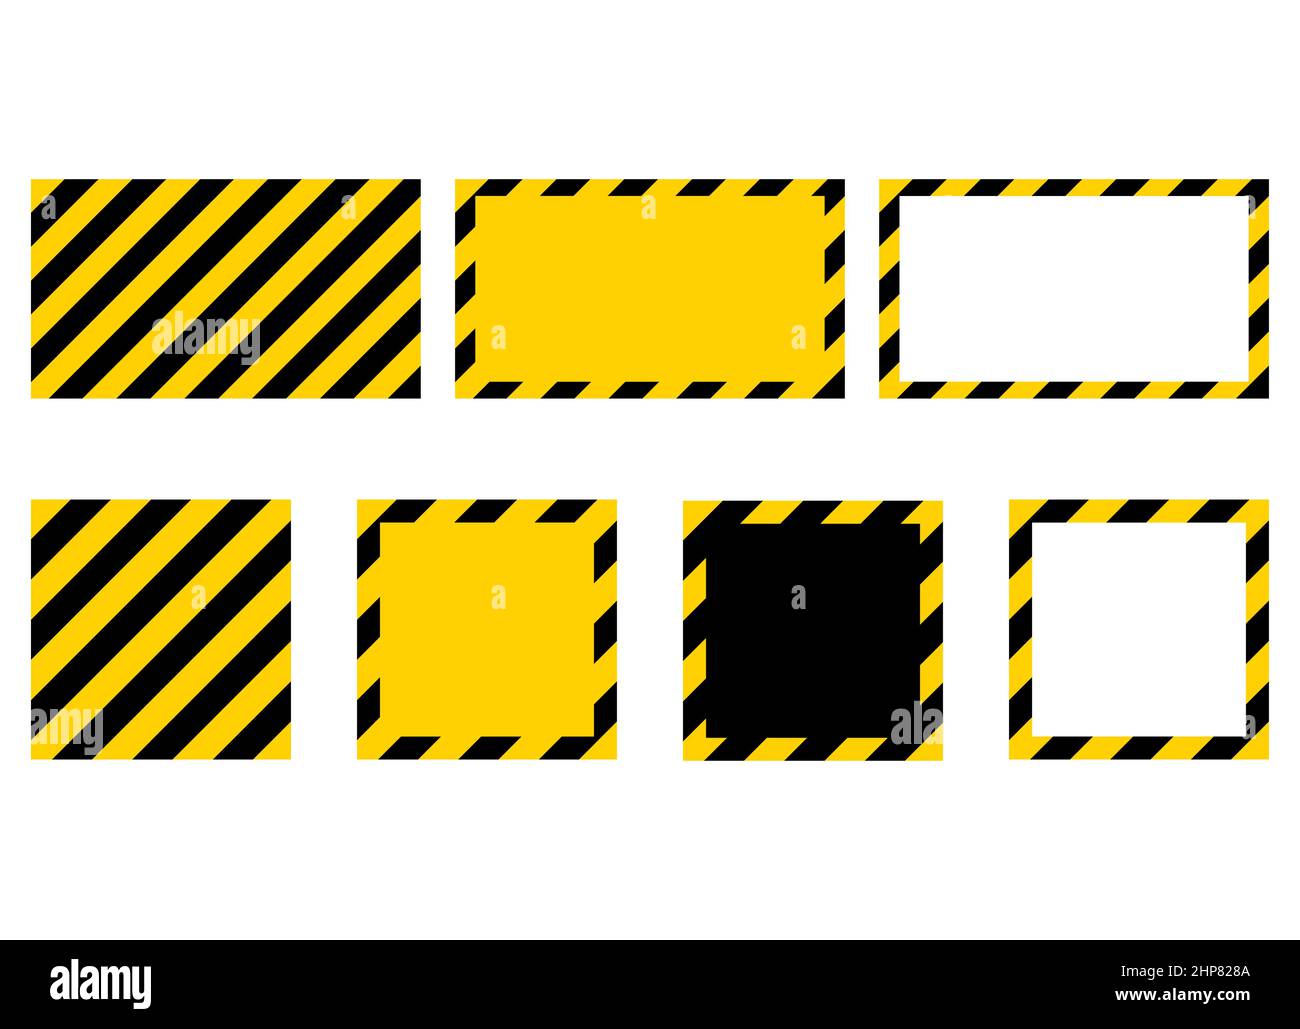 Yellow and black caution tape frame. Warning sign stripe border set. Vector illustration of construction ribbon. Stock Vector